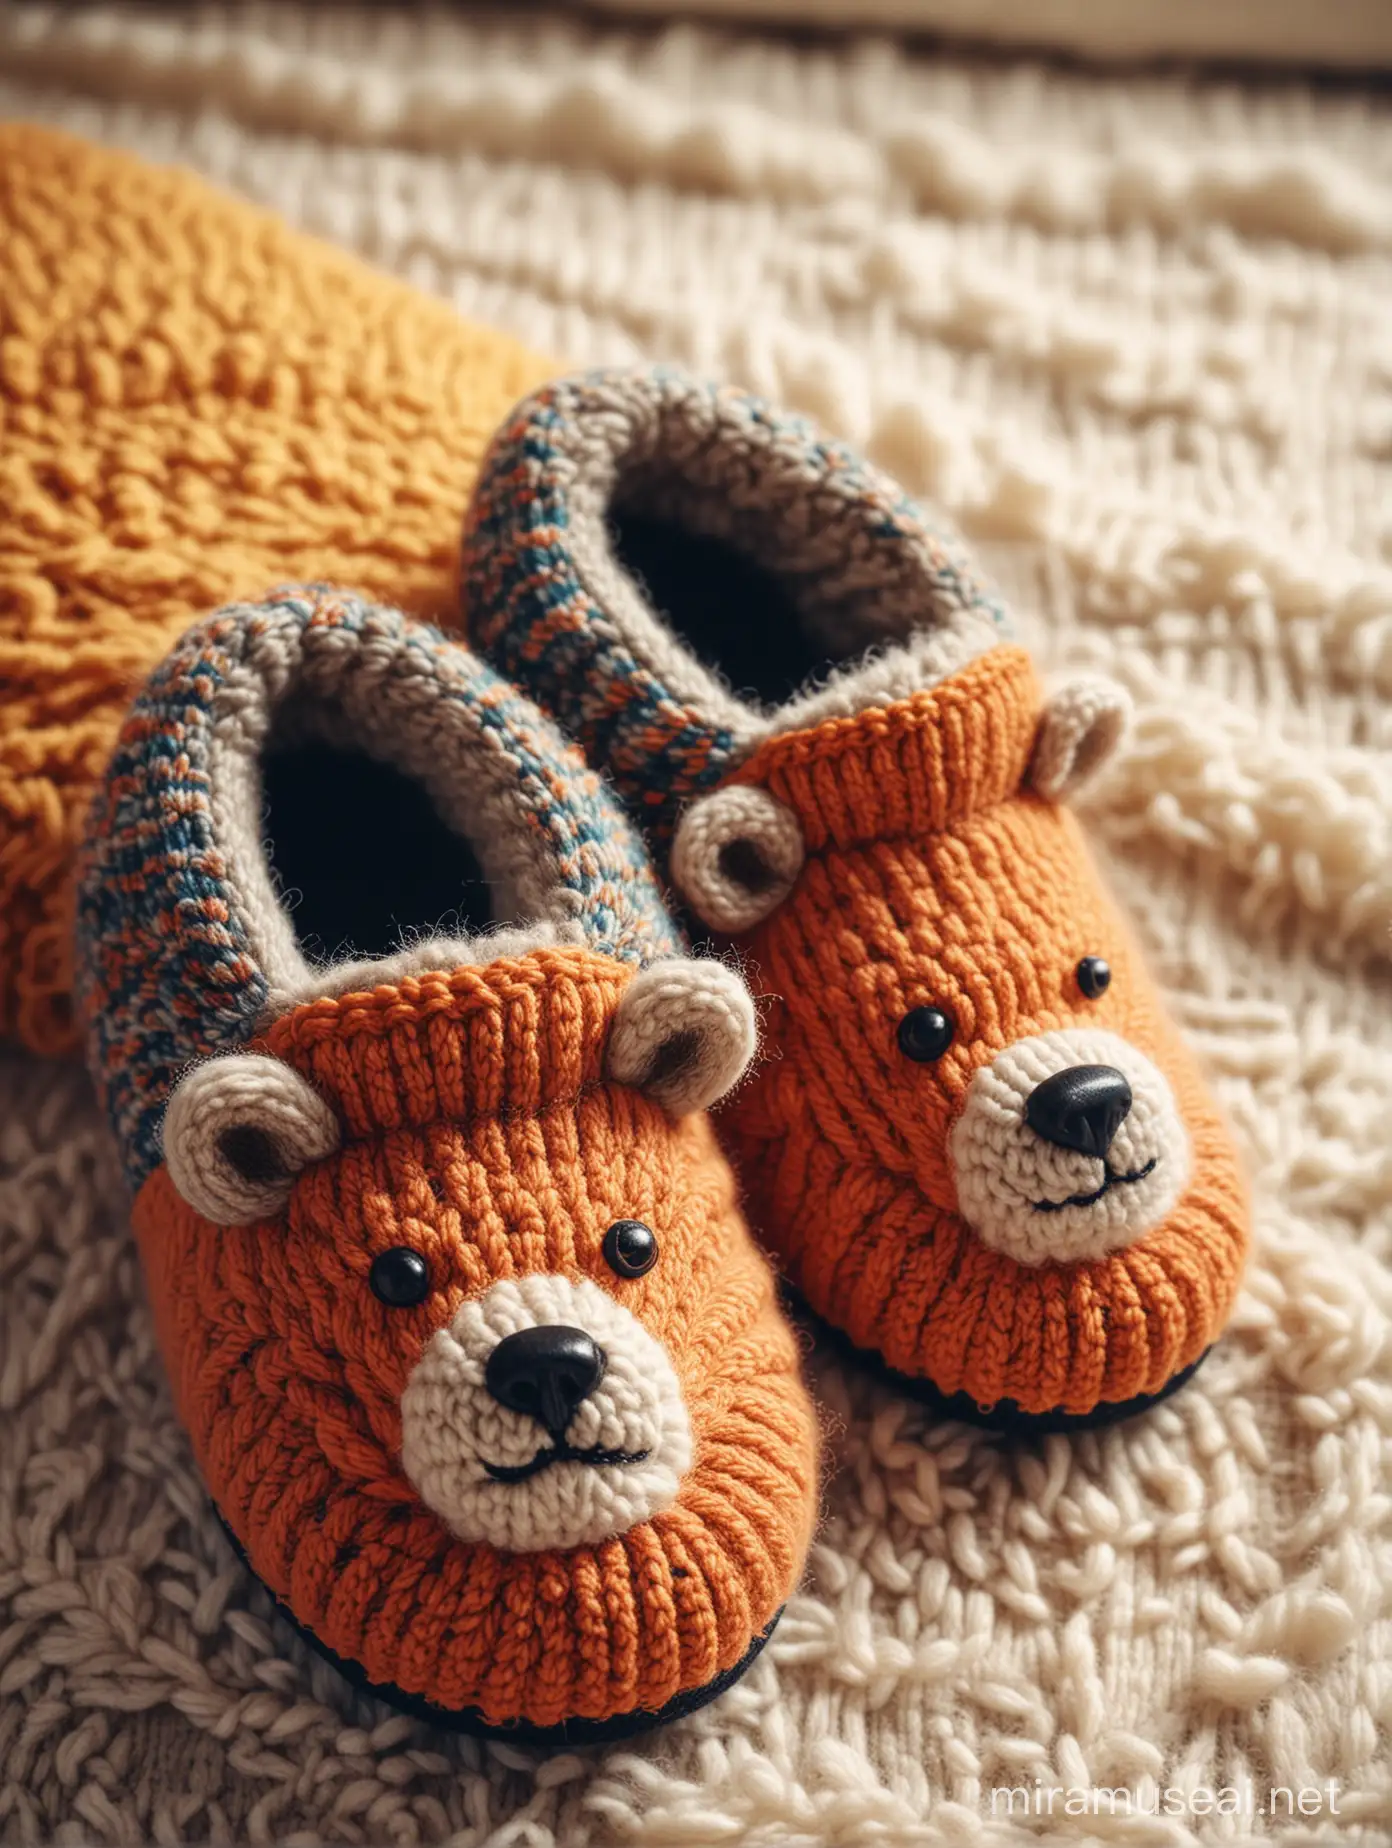 Colored knitted slippers with a bear face, cozy winter footwear, cute and playful, handcrafted, wool material, vibrant colors, intricate knitting pattern, fluffy texture, inspired by Scandinavian design, warm and fuzzy, natural light, soft morning sunlight, taken by a vintage film camera, 50mm lens, bokeh effect, 35mm film, retro aesthetic